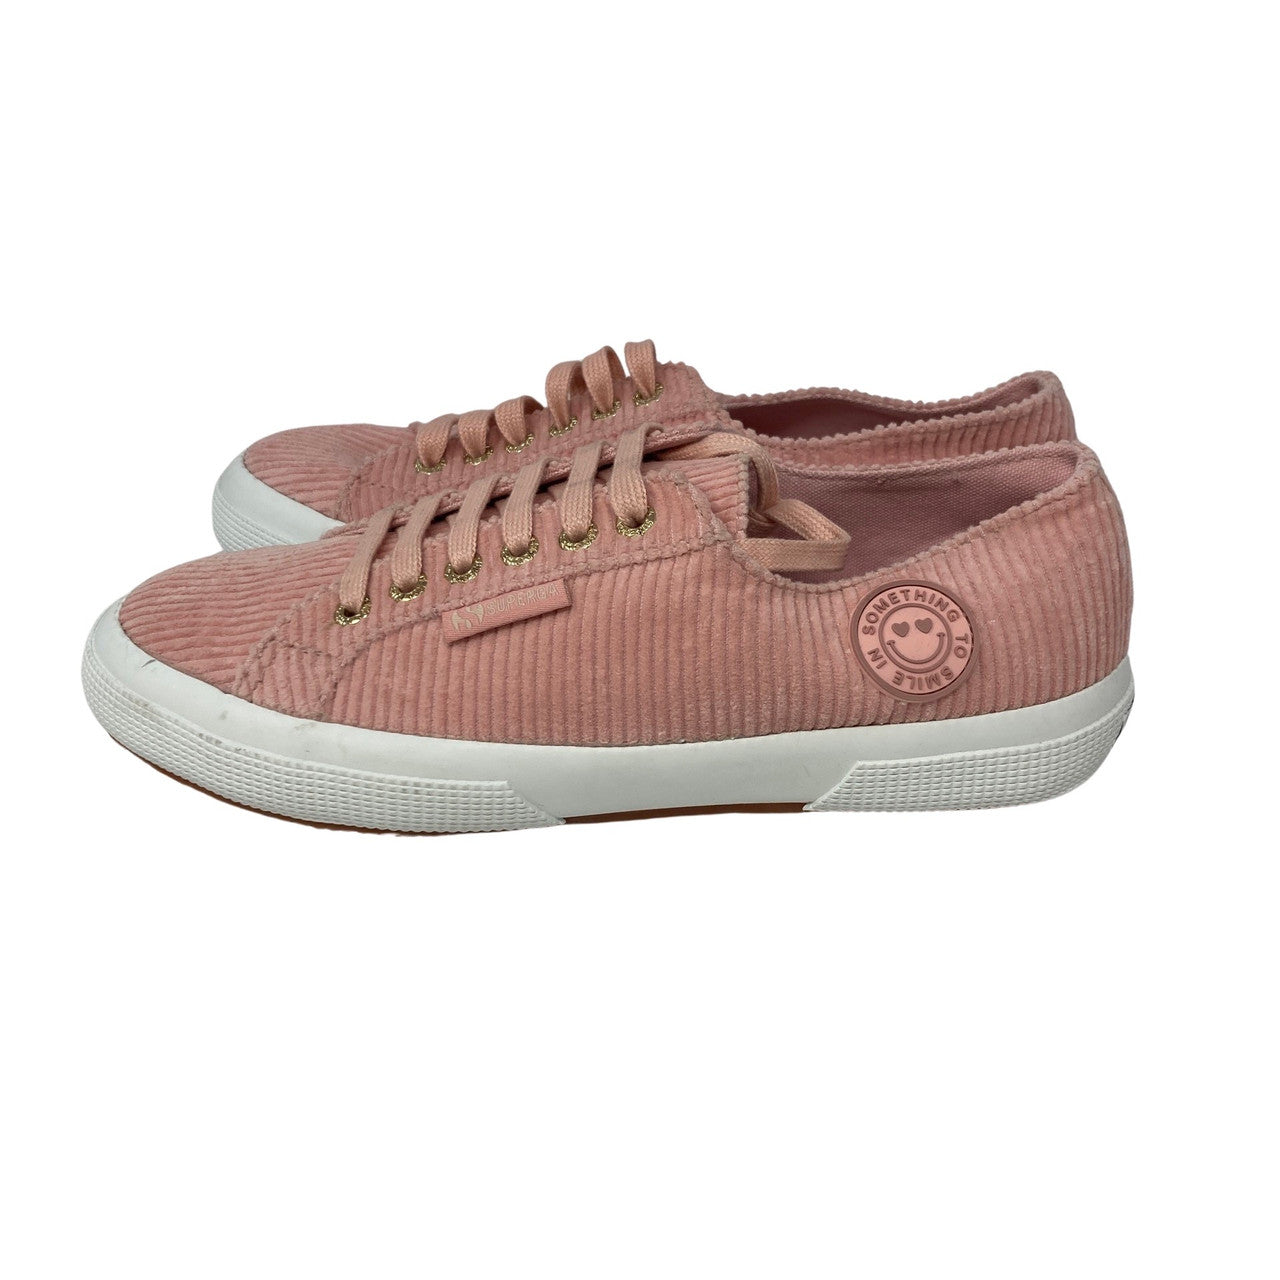 Superga X Something Navy Pink Cord Sneakers-side